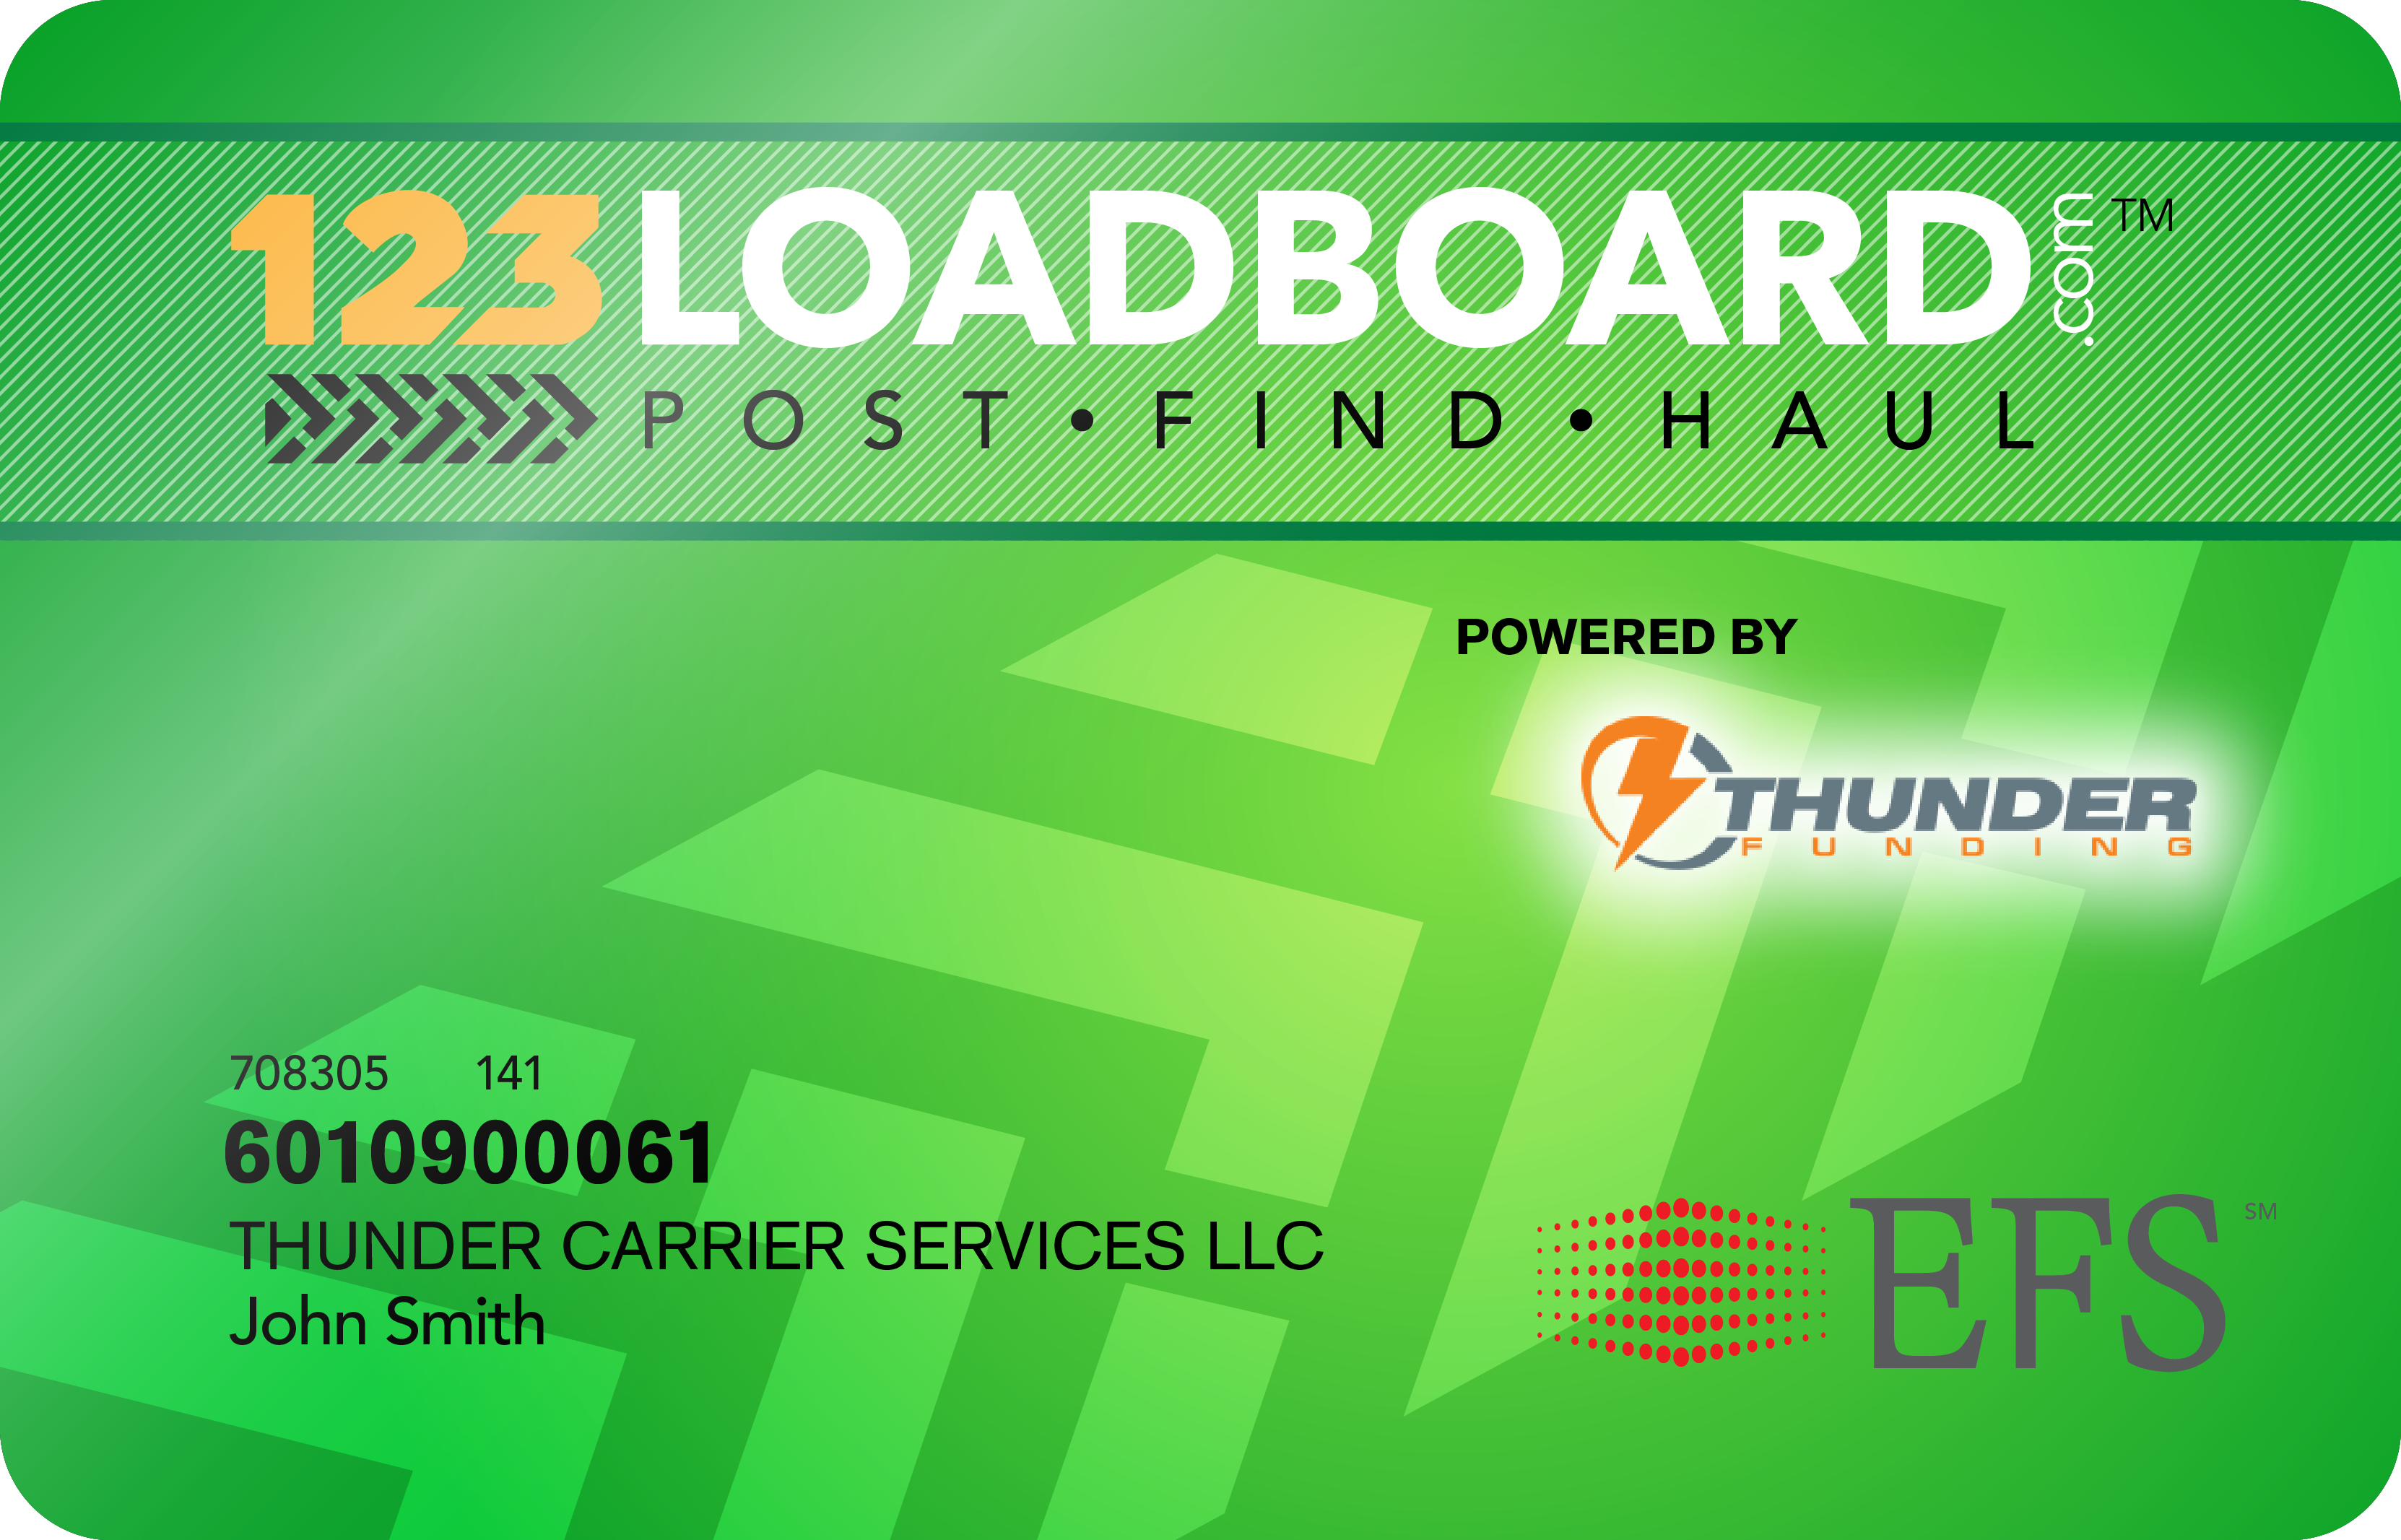 123loadboard Introduces A Fuel Card Program That Rewards Drivers With Ongoing Cents Per Gallon Fuel Savings 123loadboard